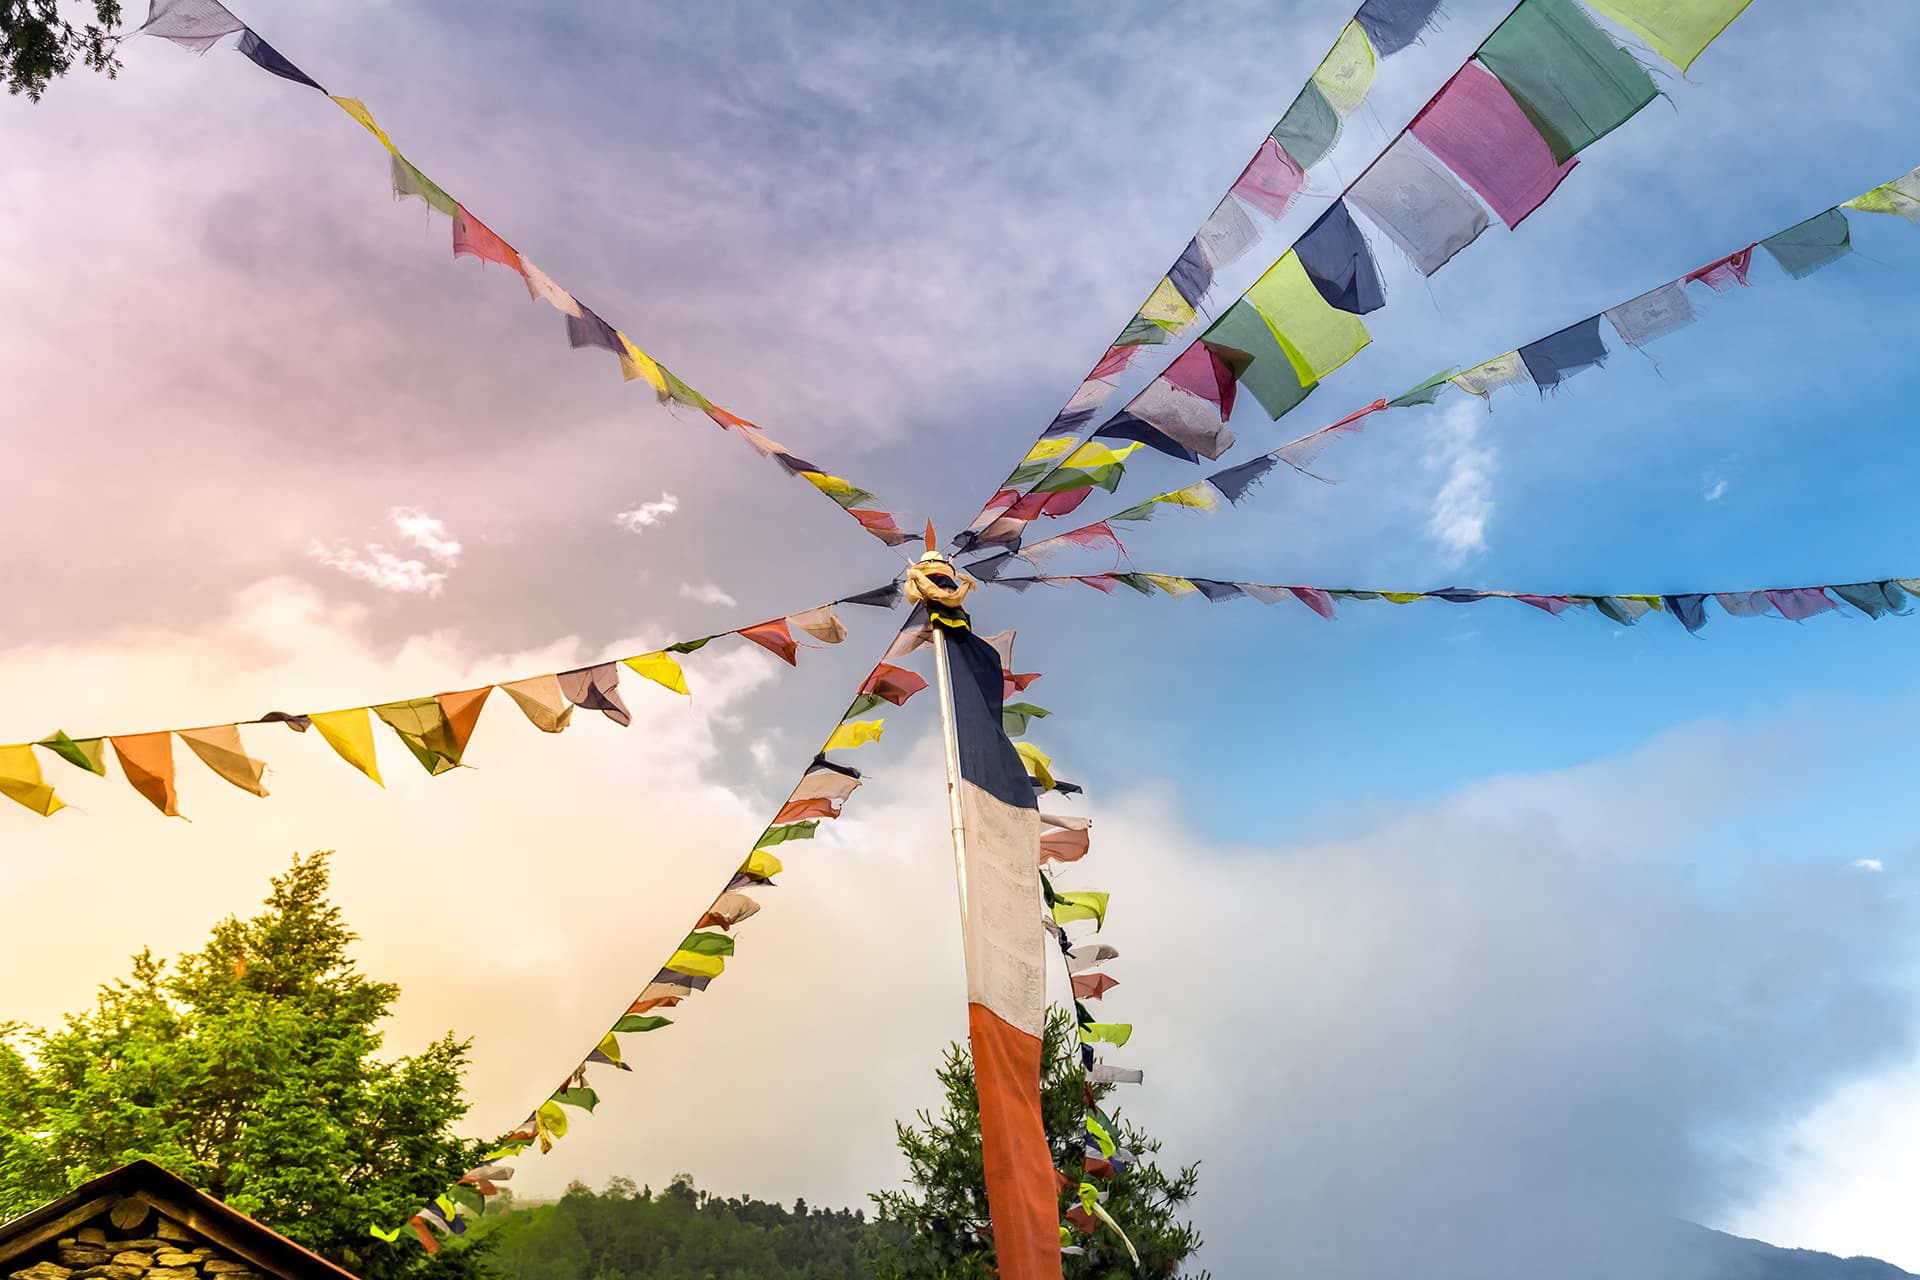 Buddhist tibetan prayer flags against blue sky with a cloud. Many colorful waving flags suspended between trees